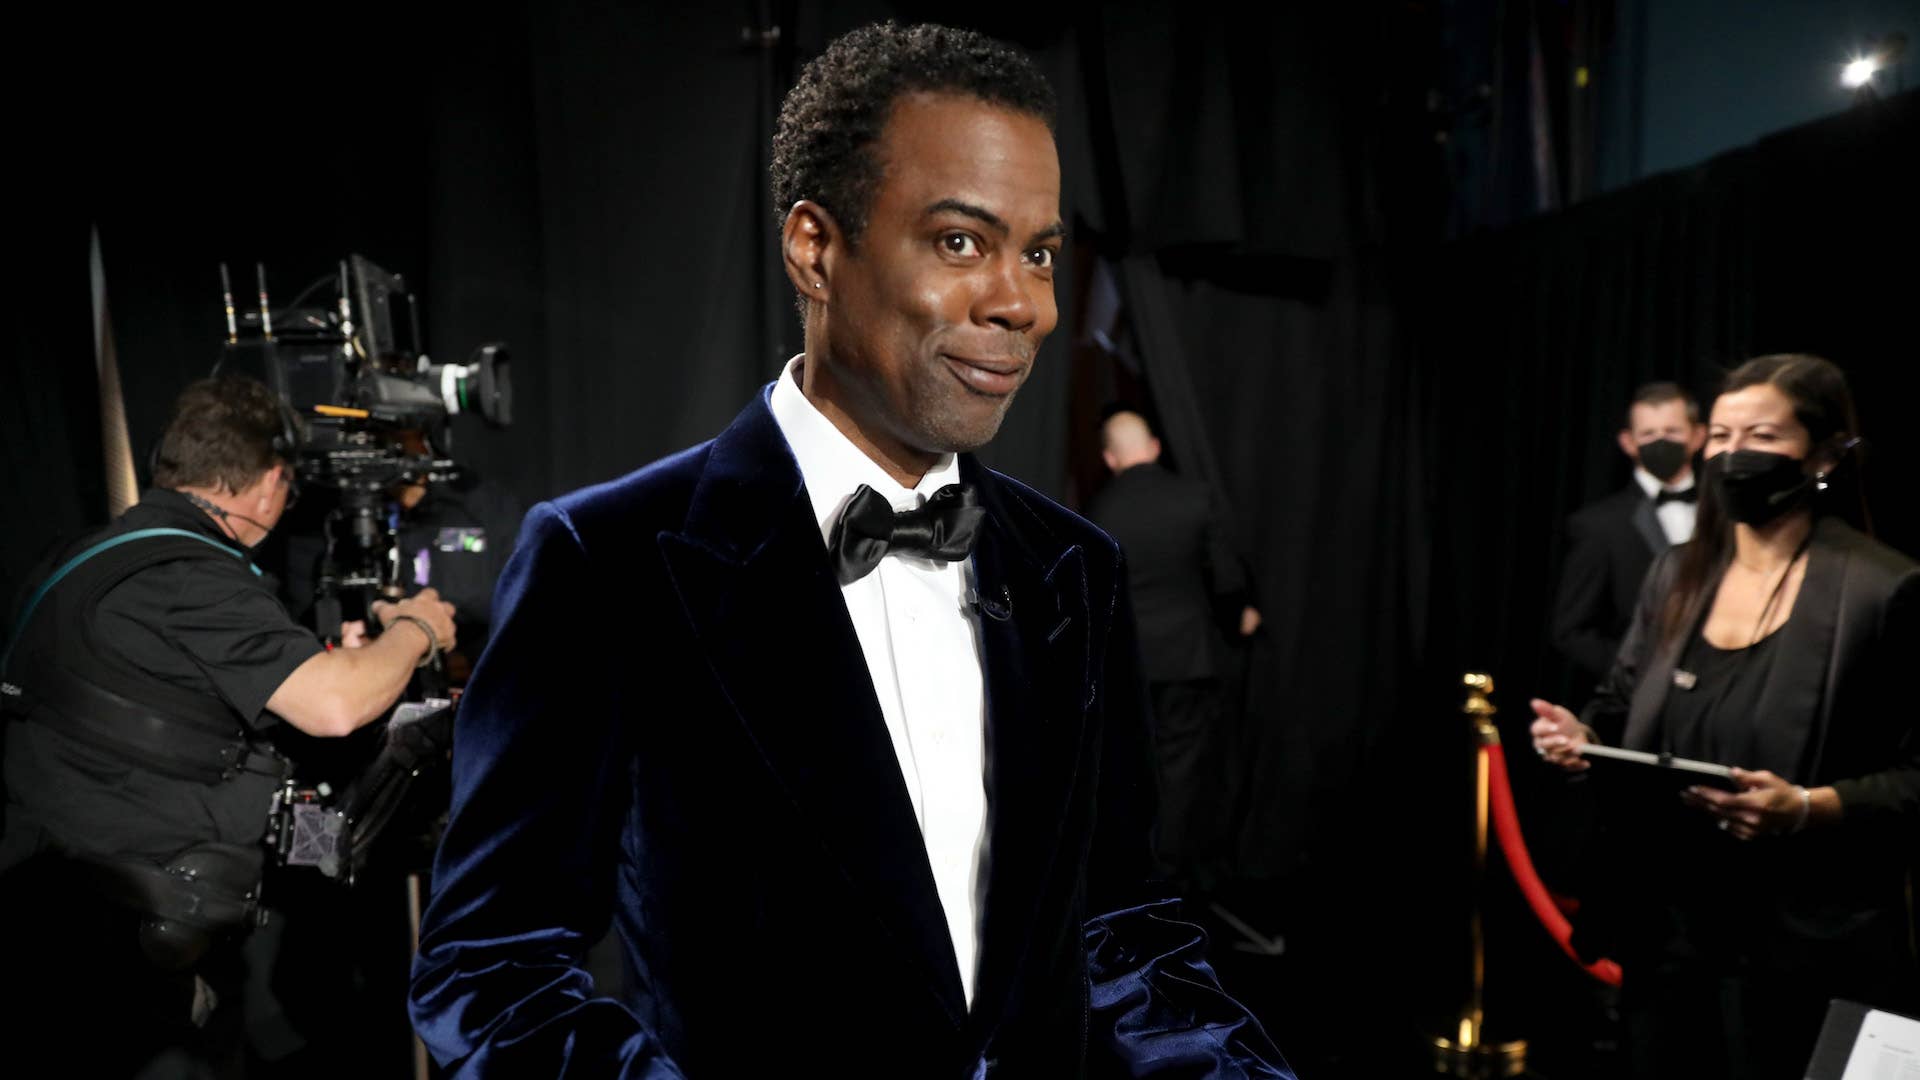 Chris Rock photographed at the Oscars